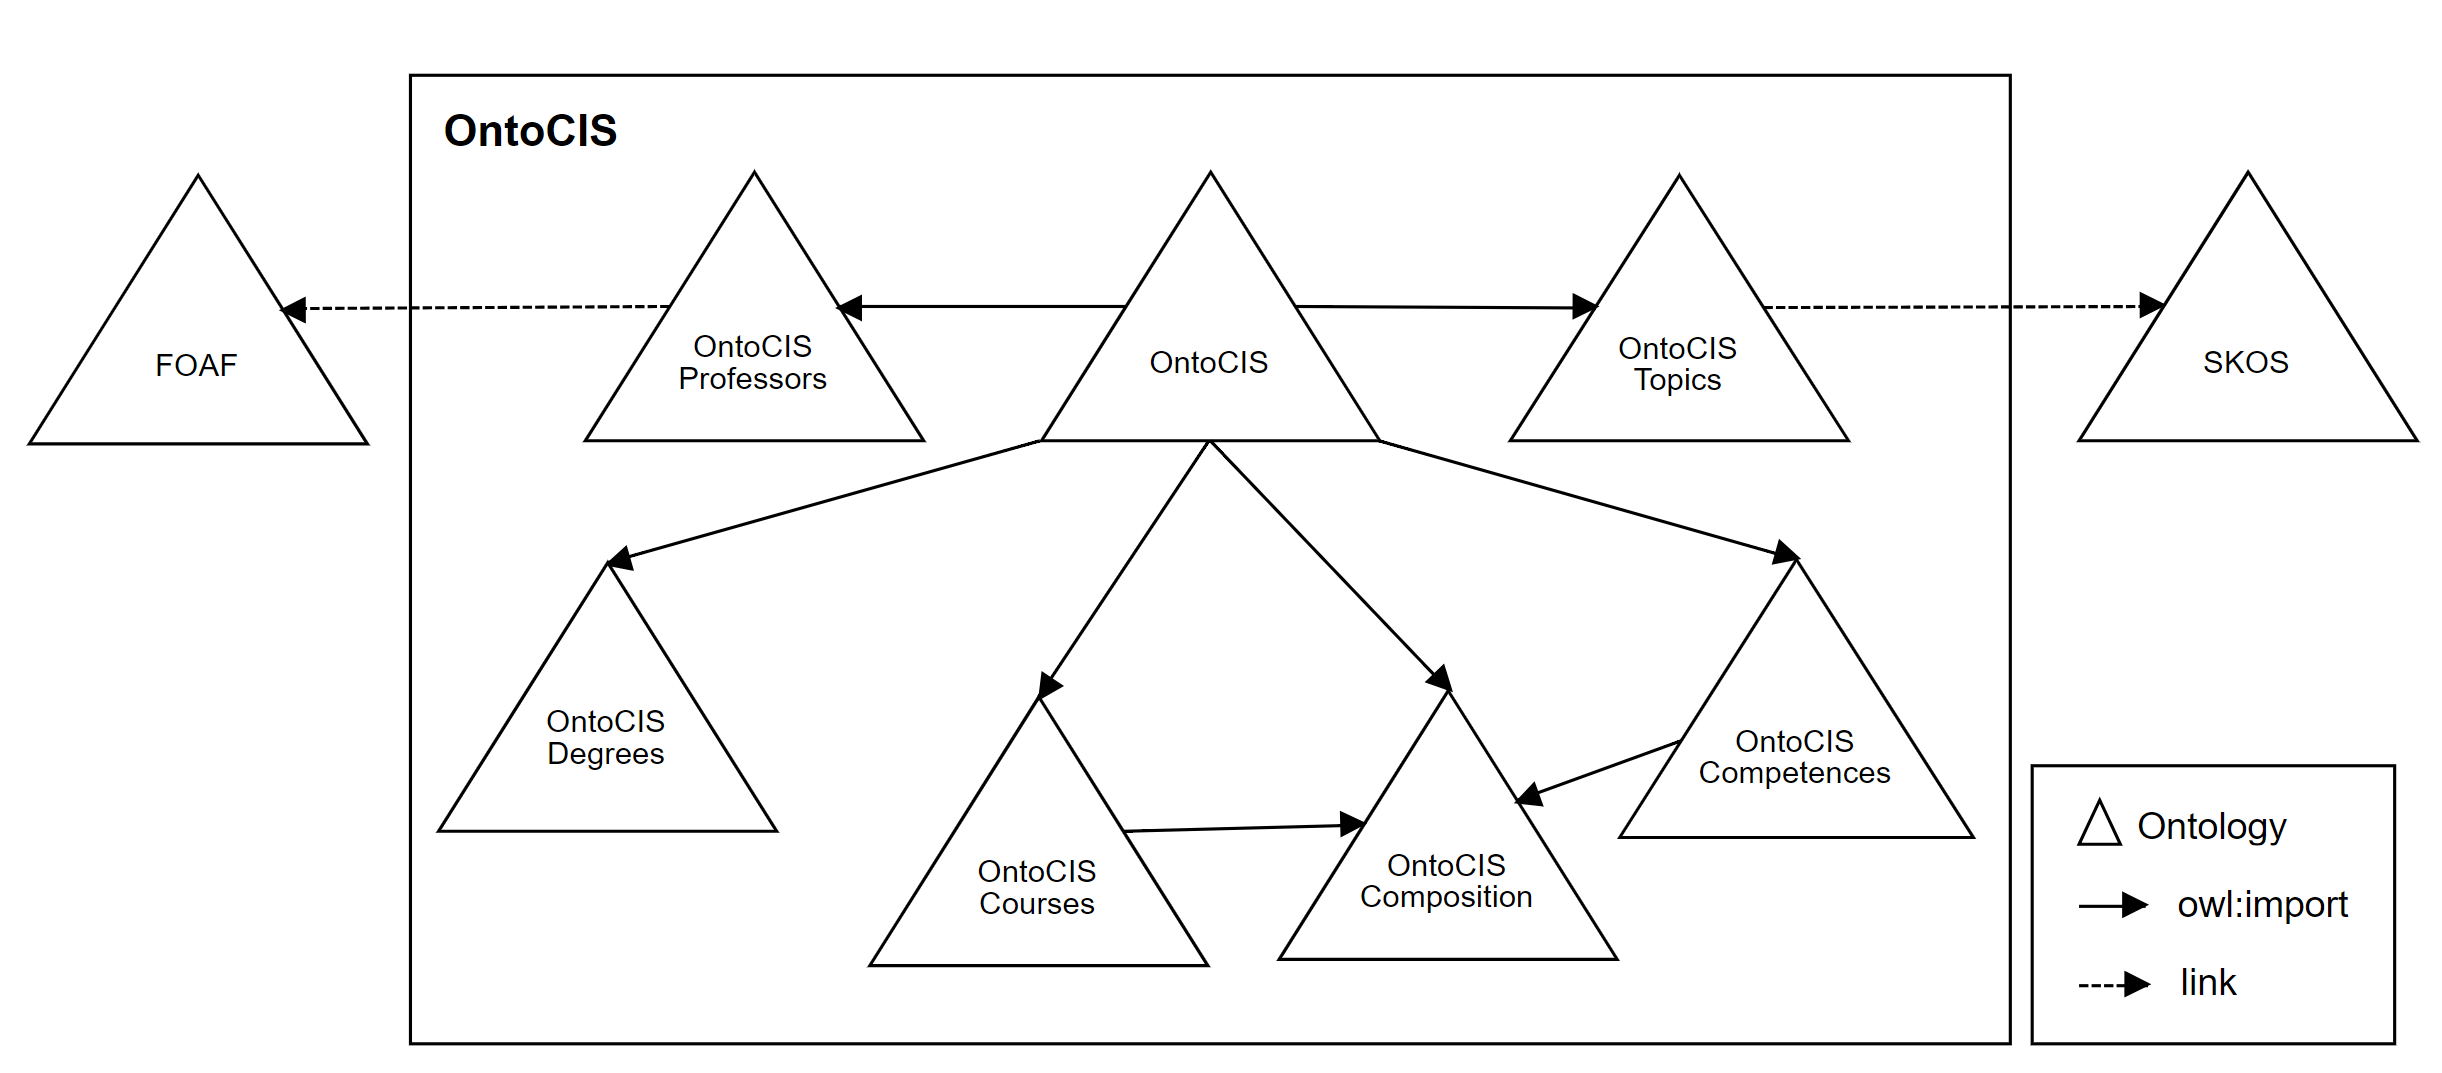 Diagram of the ontology